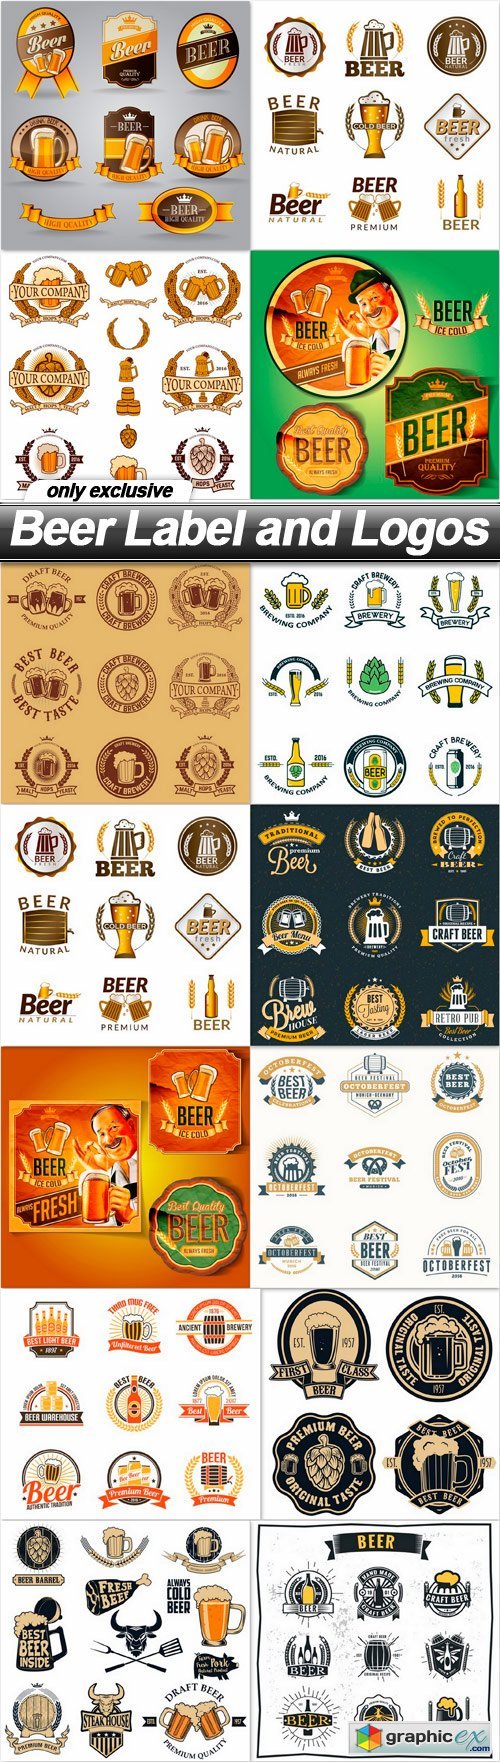 Beer Label and Logos - 14 EPS